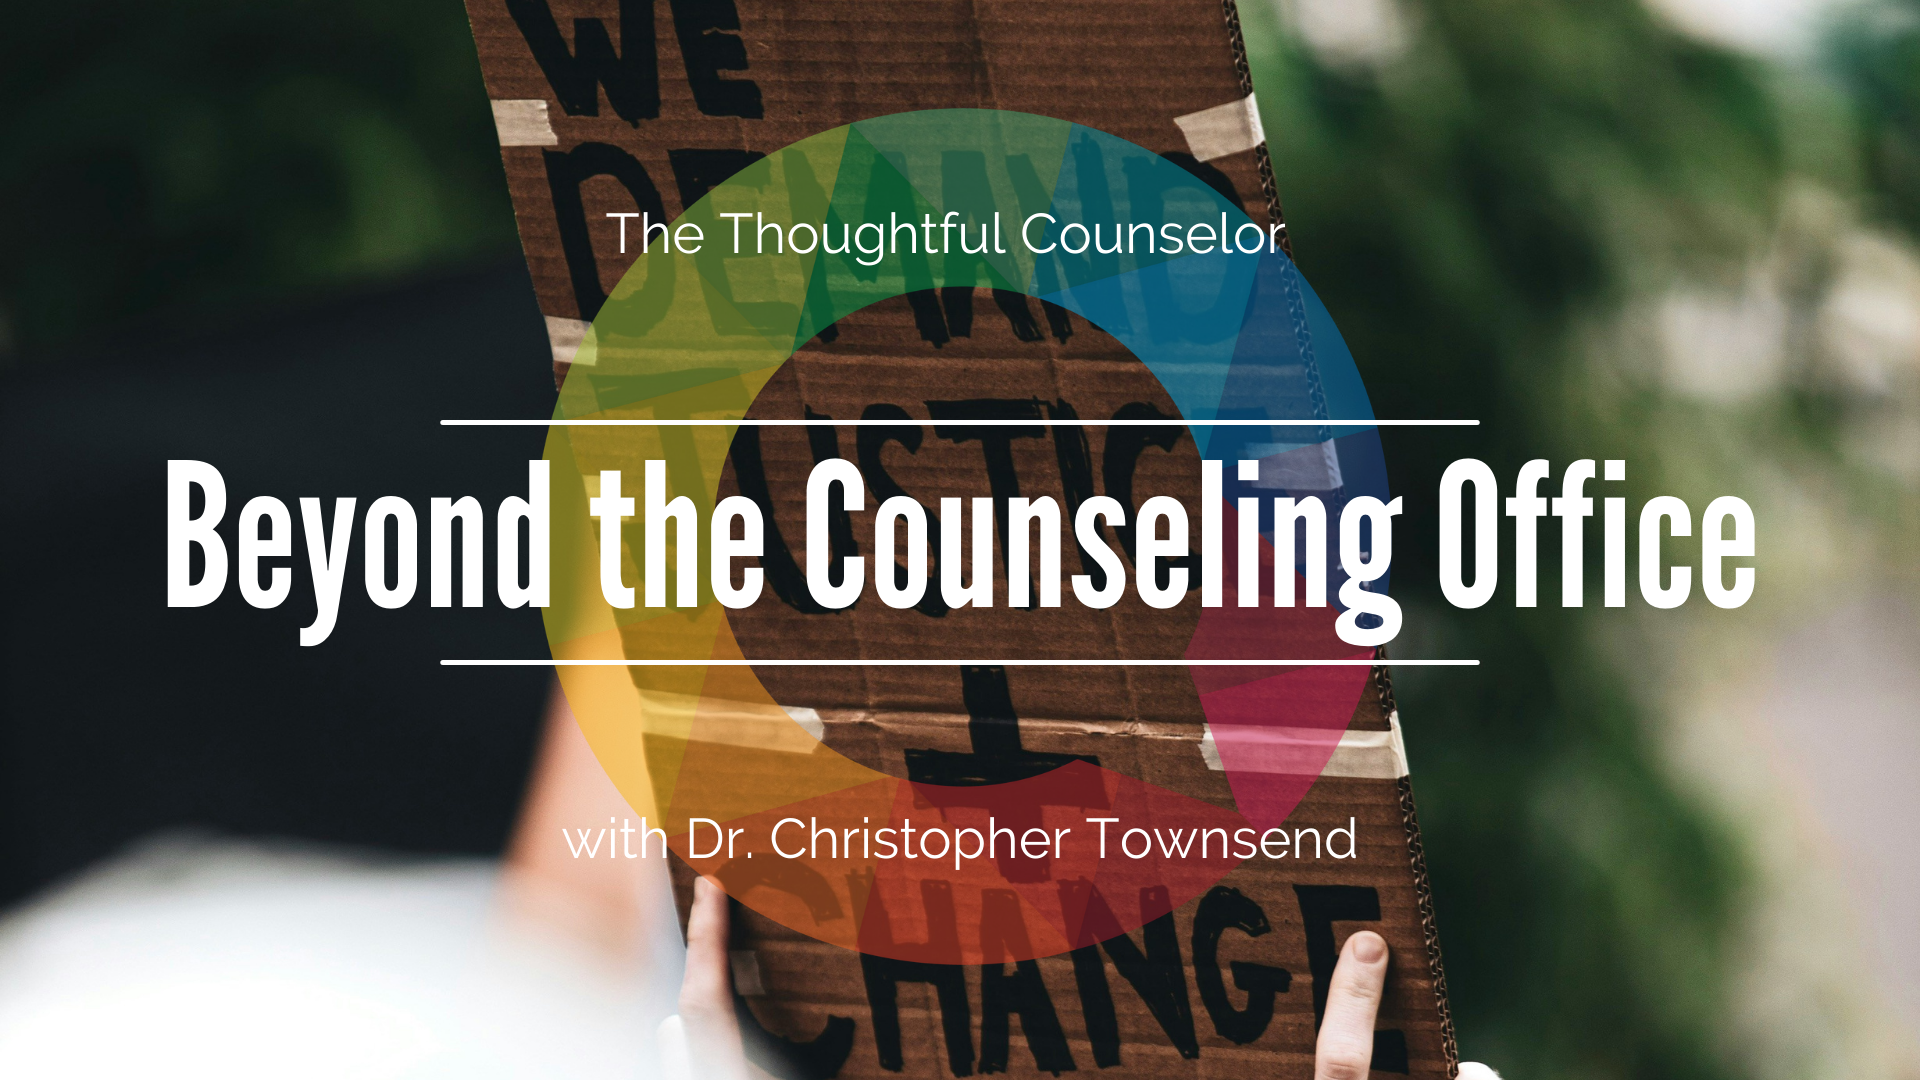 Social Justice Beyond the Counseling Office